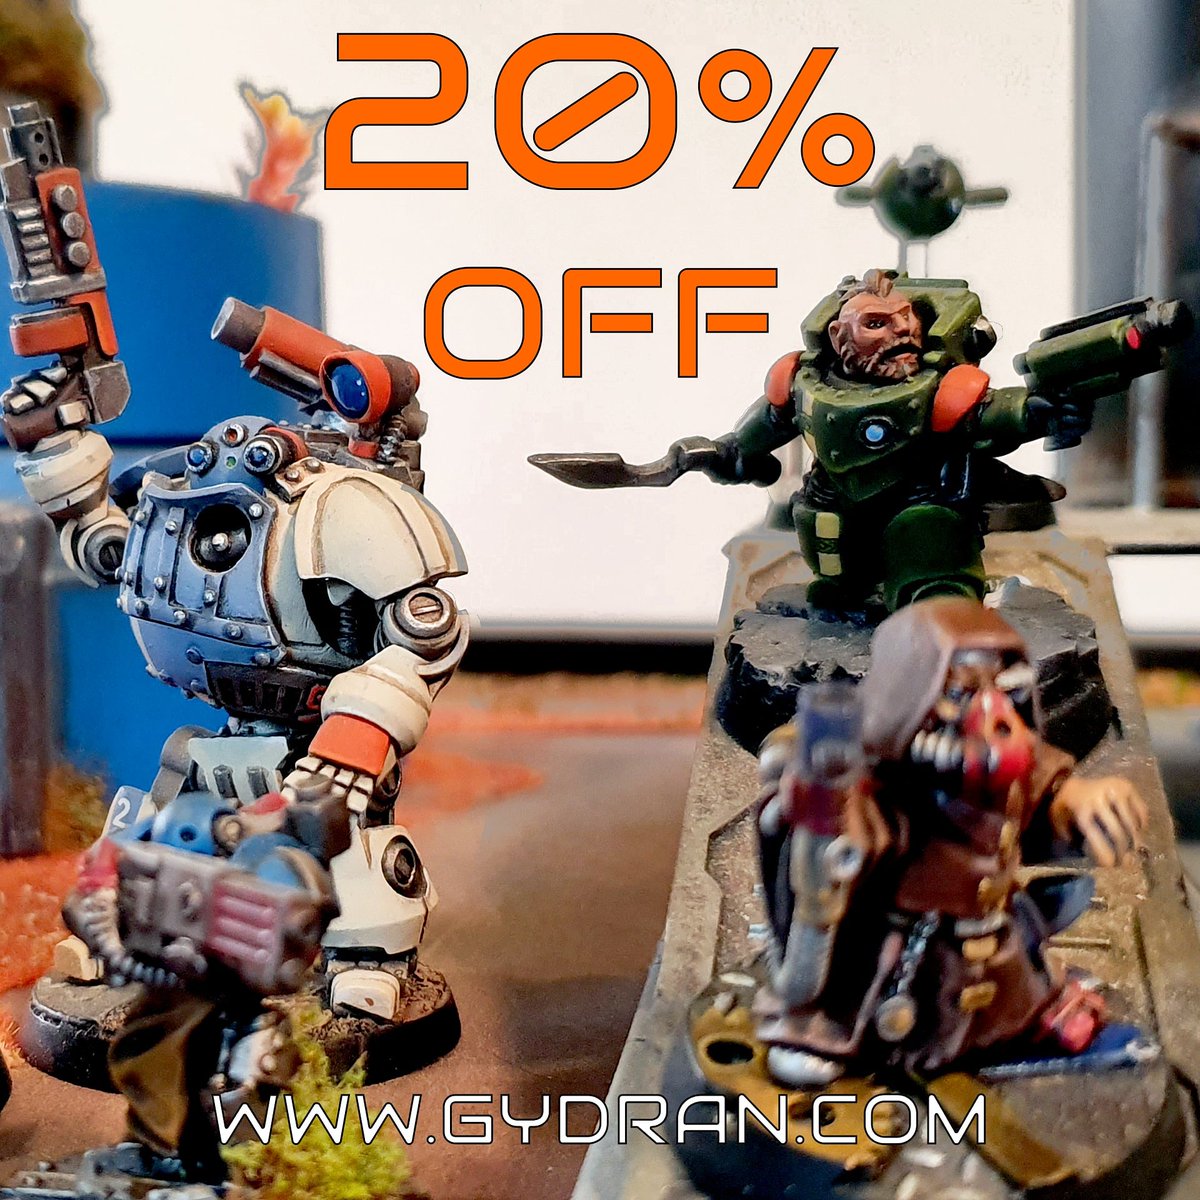 Usually I run a competition every year to celebrate my birthday, but this year has been a little different for obvious reasons. Instead I am giving 20% off all products in the Gydran store between now and June 20th 2020. Just use the code 'june2020' on checkout!
#miniatuewargames